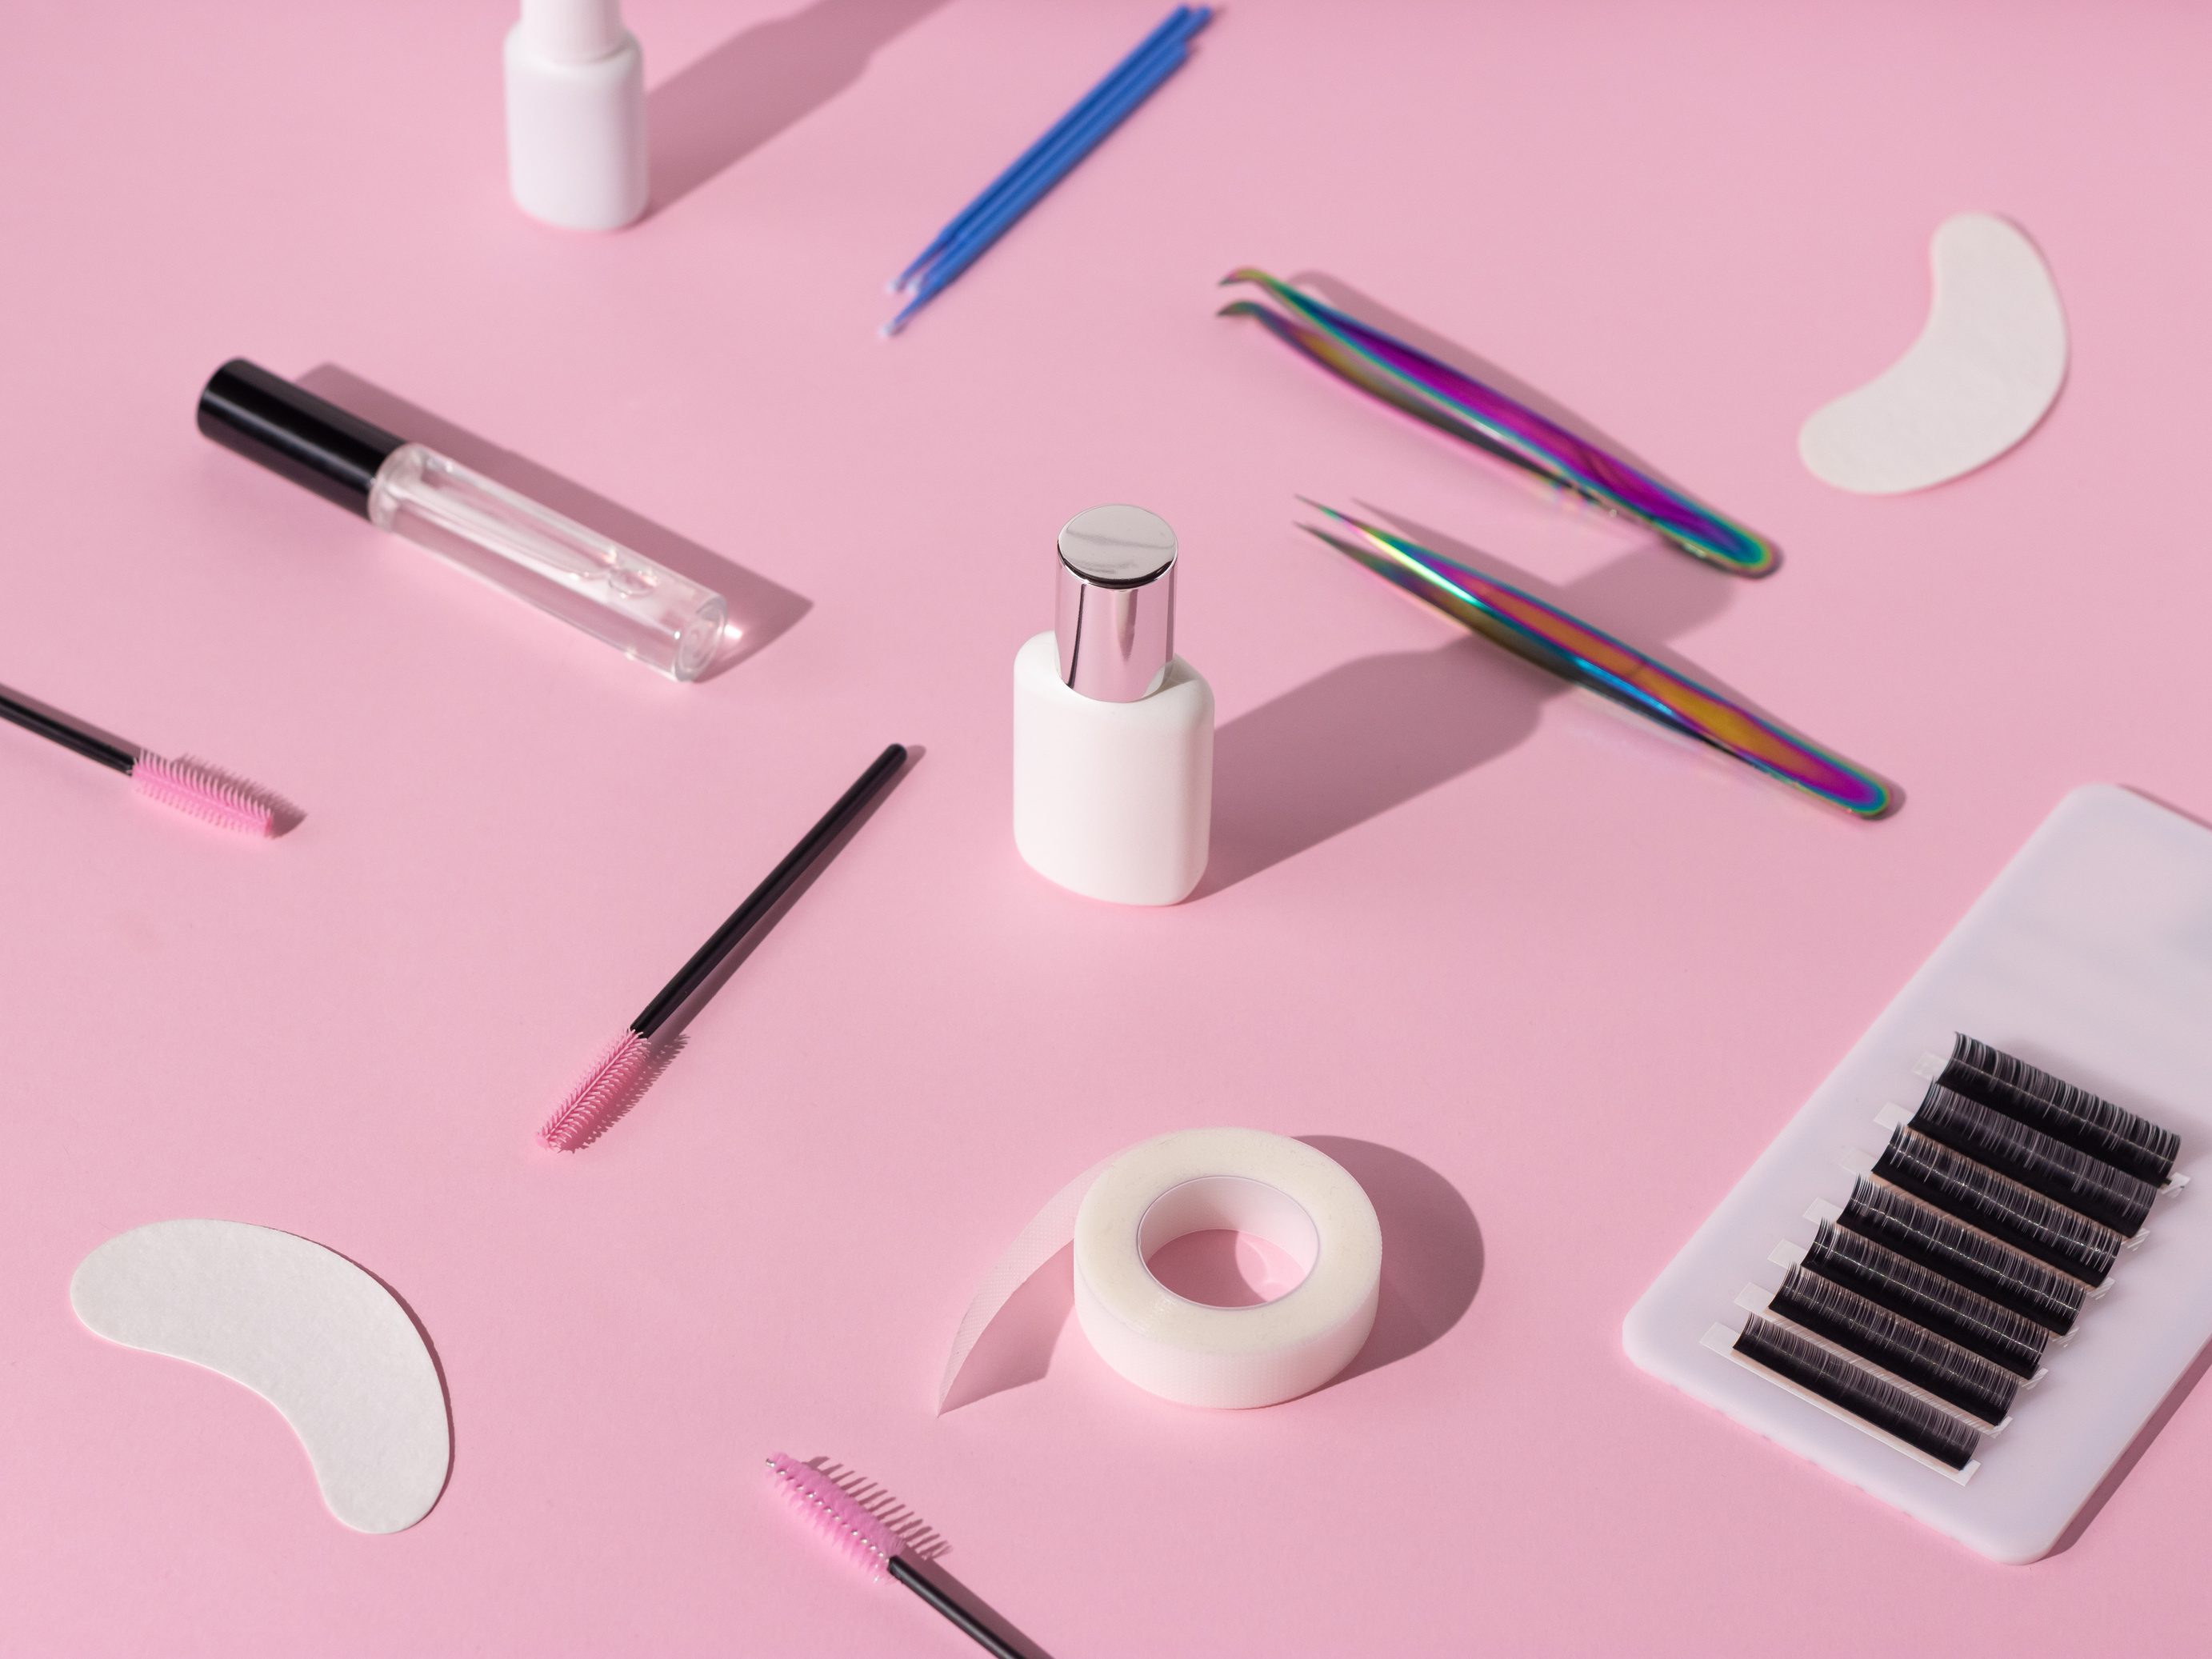 Things for the work of lash-makers, artificial eyelashes, microbrachis, glue, tweezers, combs, brushes for eyelash extensions. Eyelash extension, painting of eyebrows. Pink background.